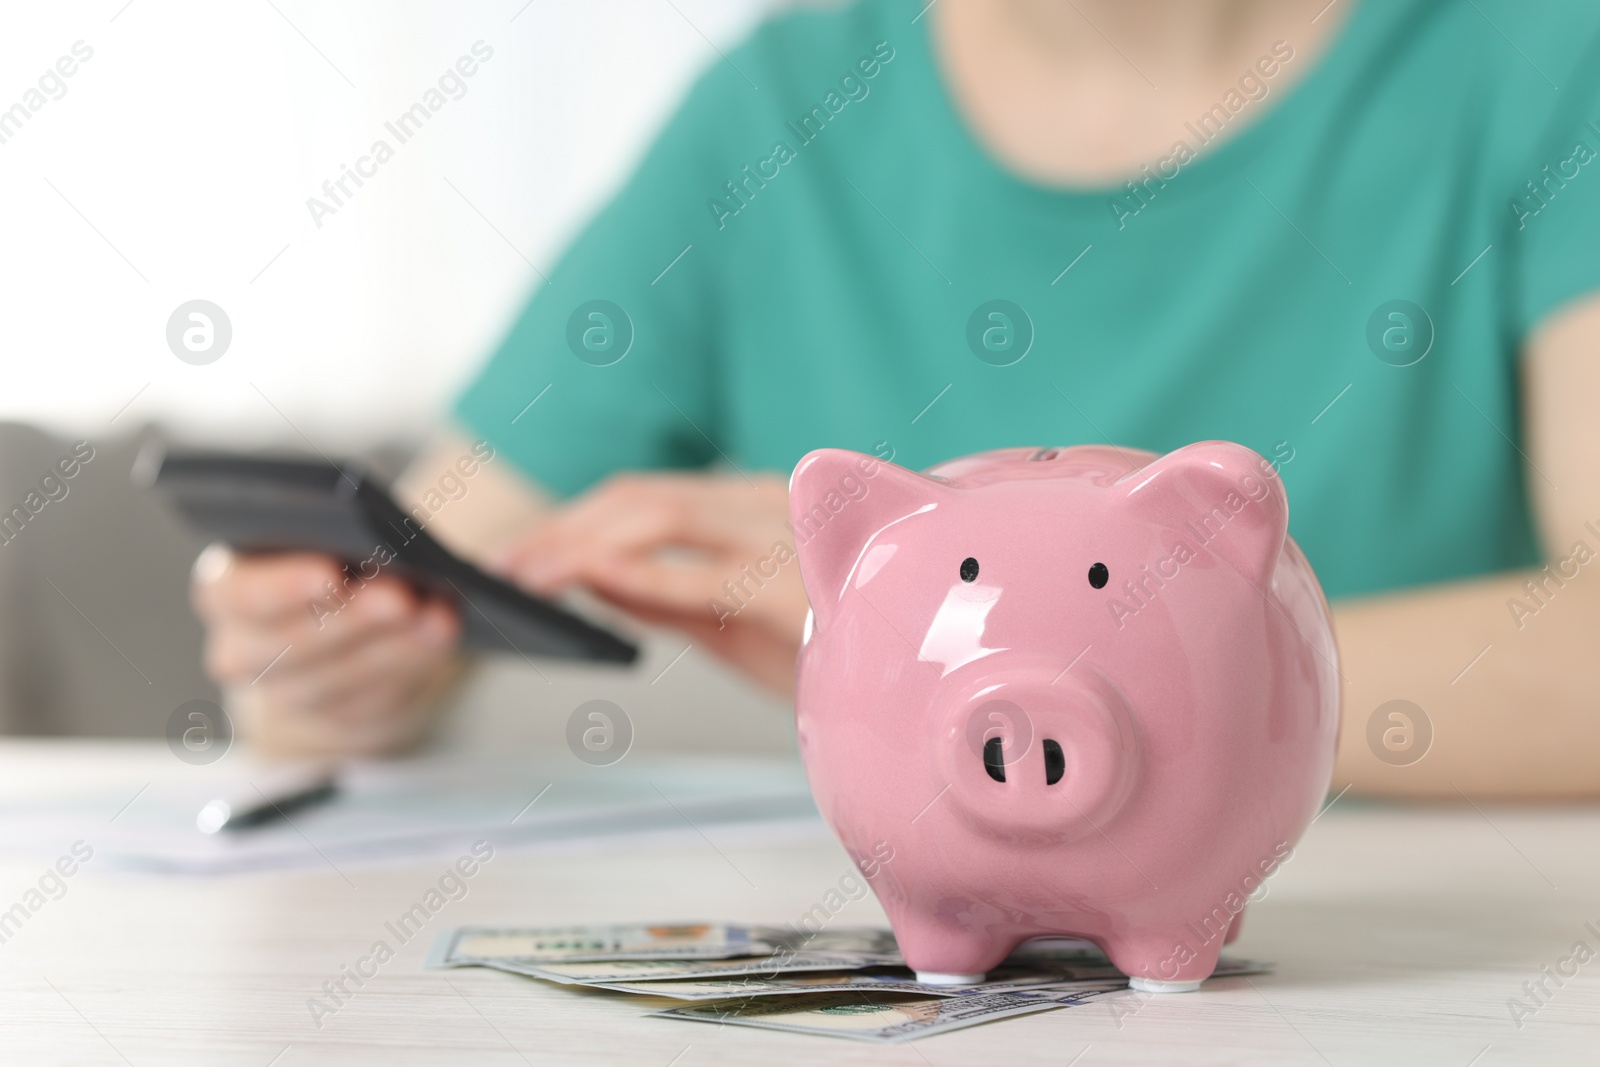 Photo of Financial savings. Woman using calculator at white wooden table indoors, focus on piggy bank and dollar banknotes